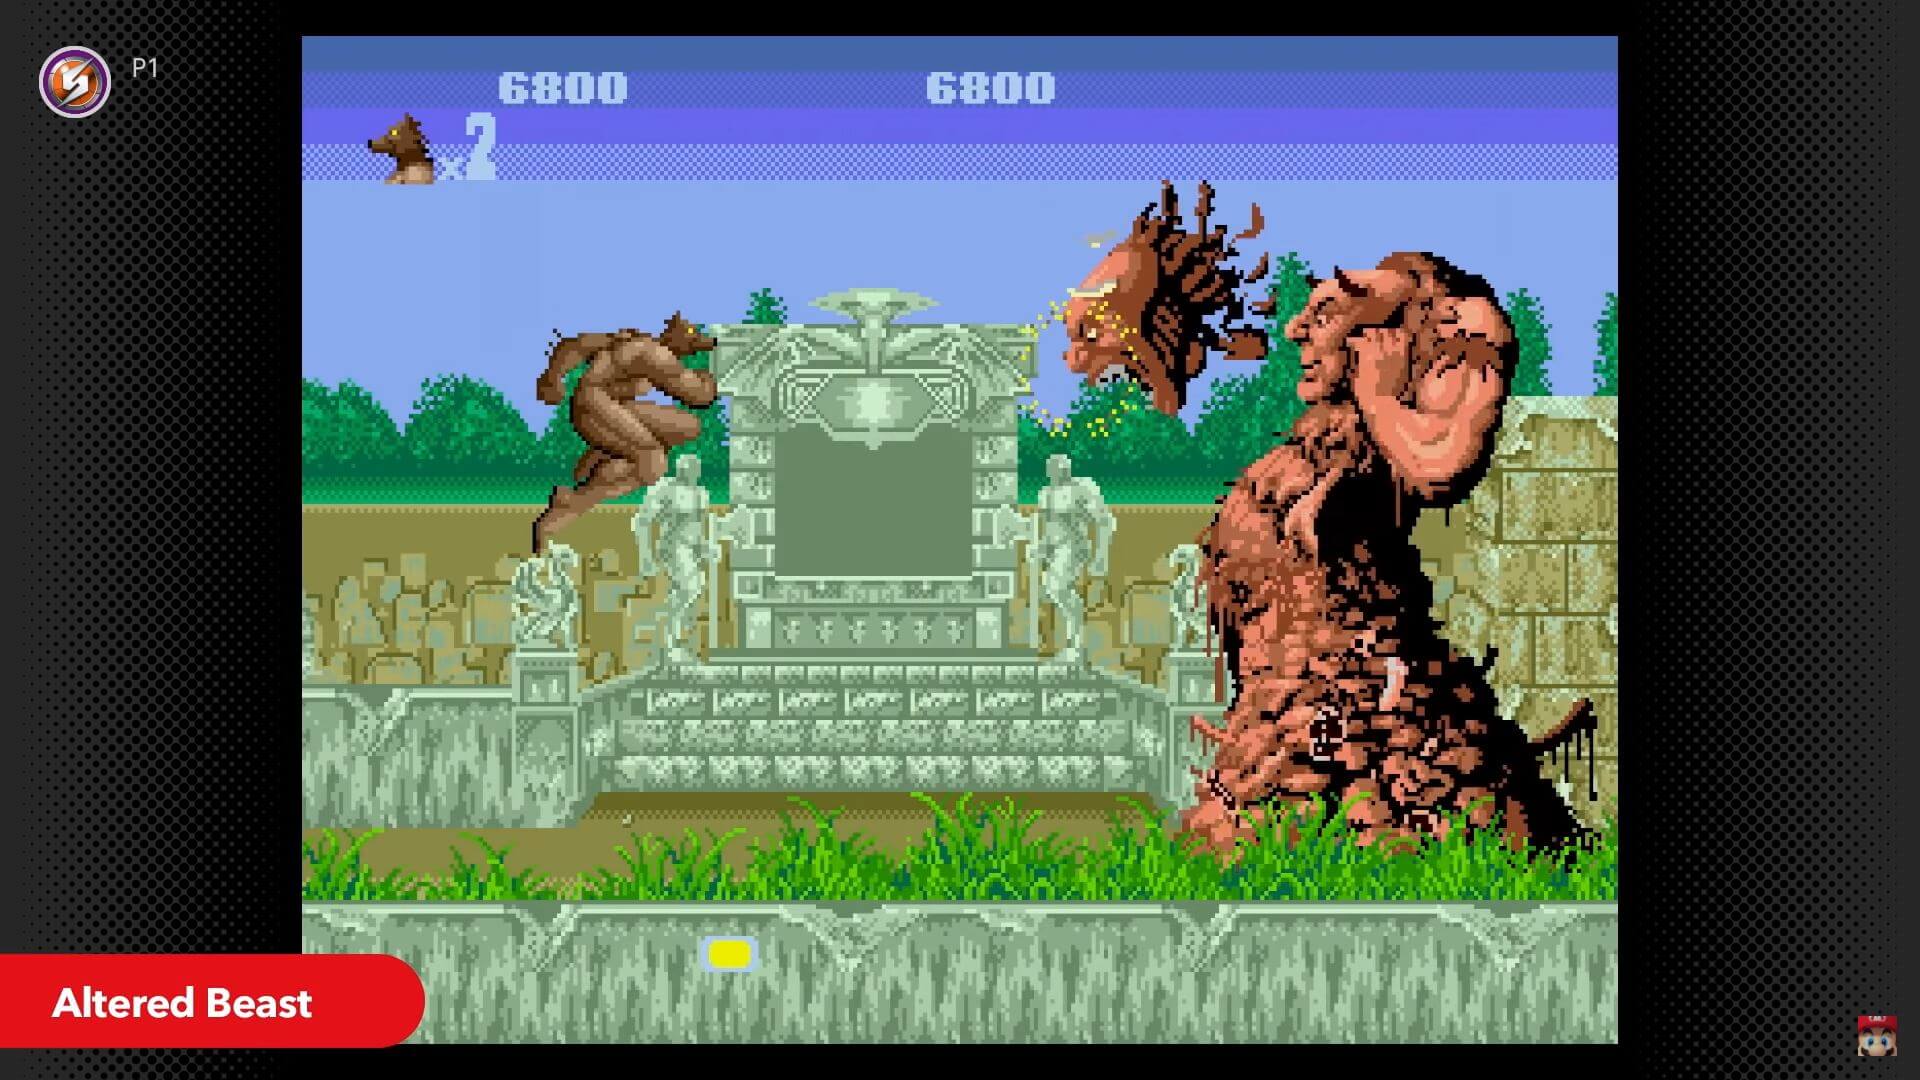 Altered Beast, one of the new Nintendo Switch Online Genesis games